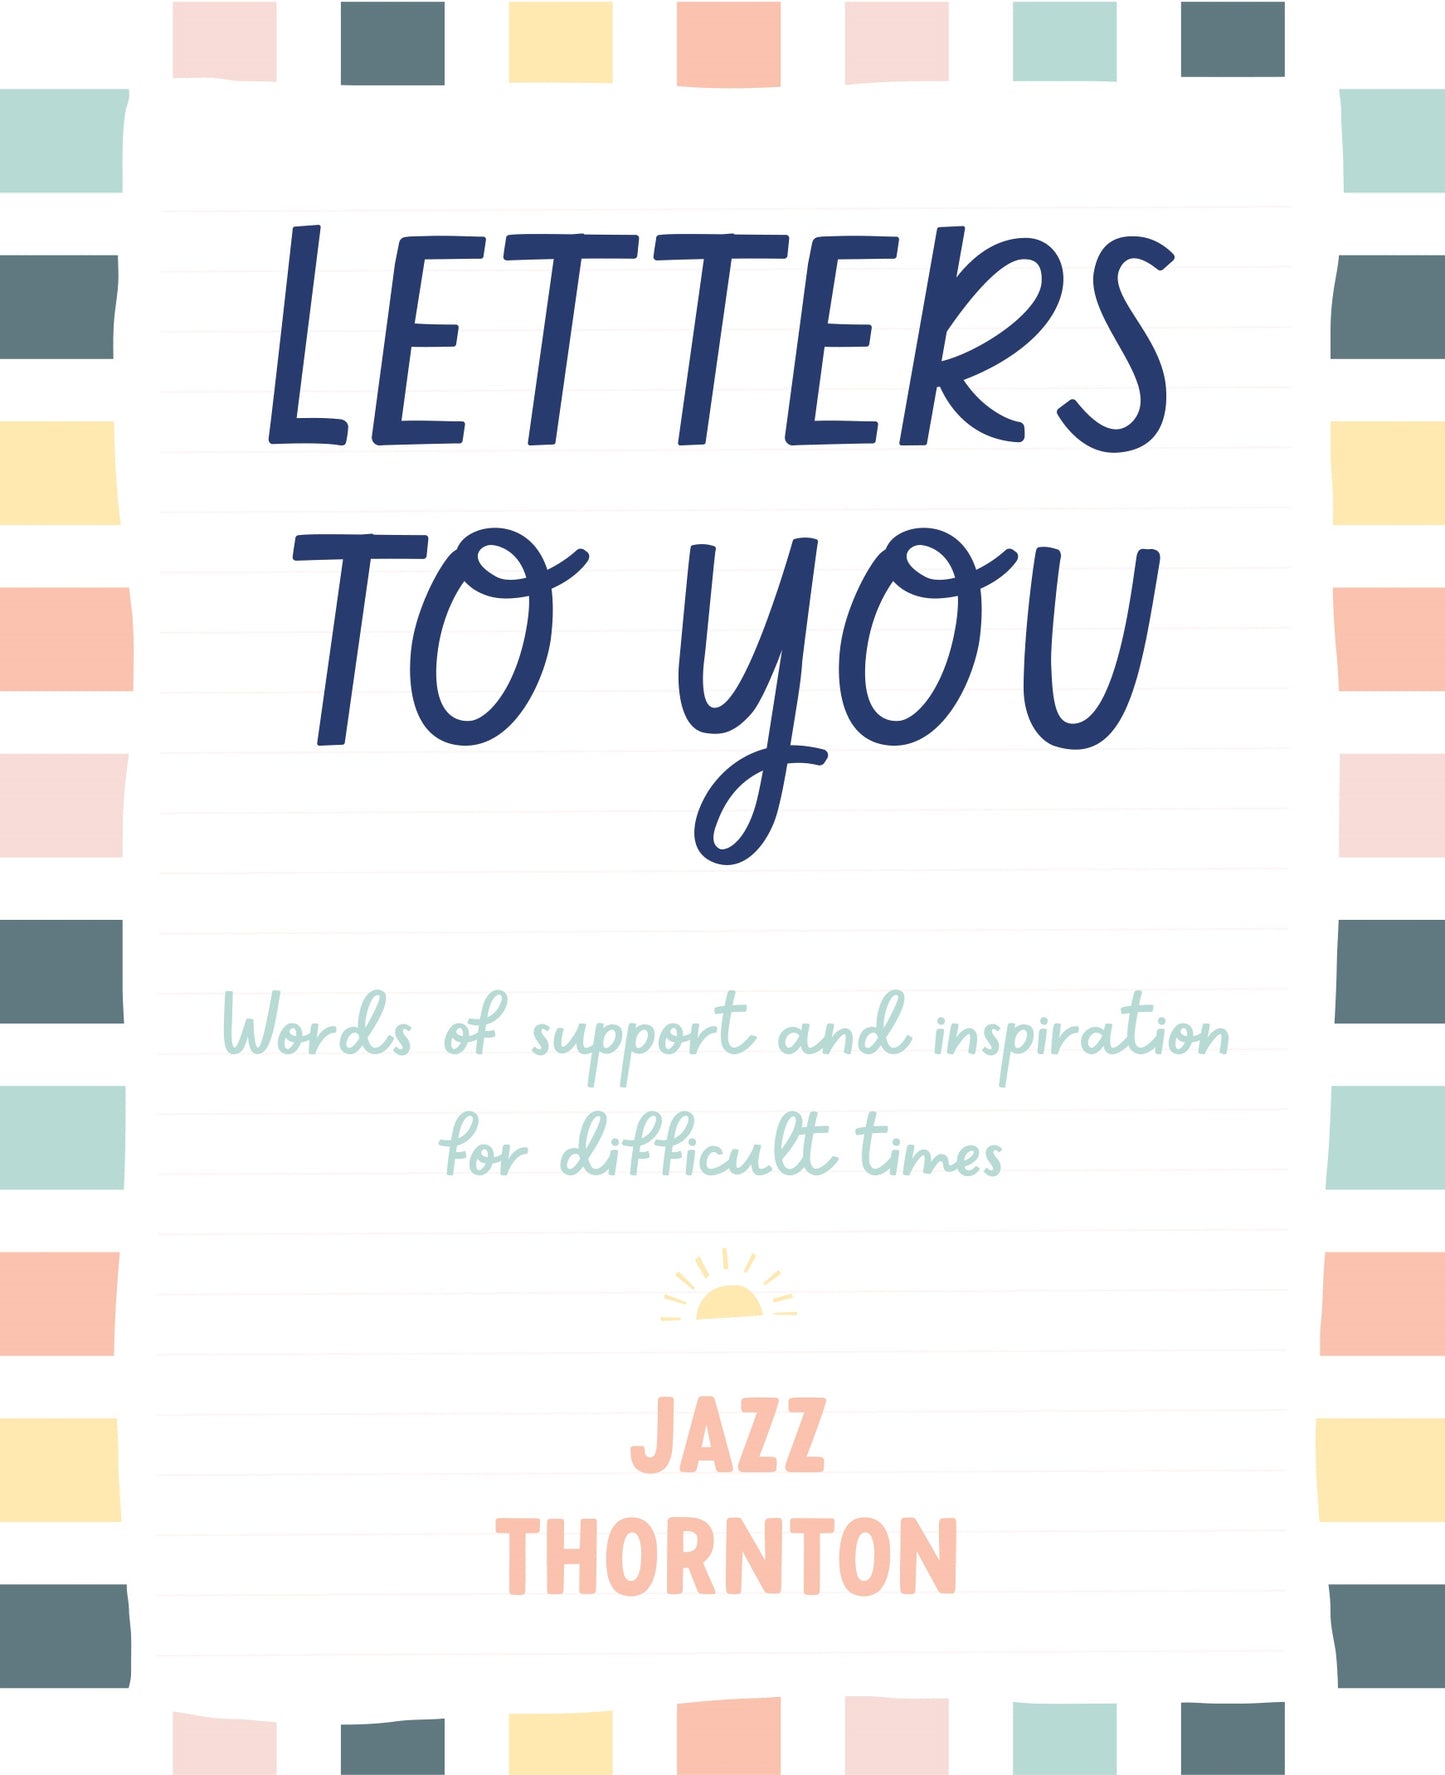 Book: Letters to You - Words of Support and Inspiration for Difficult Times